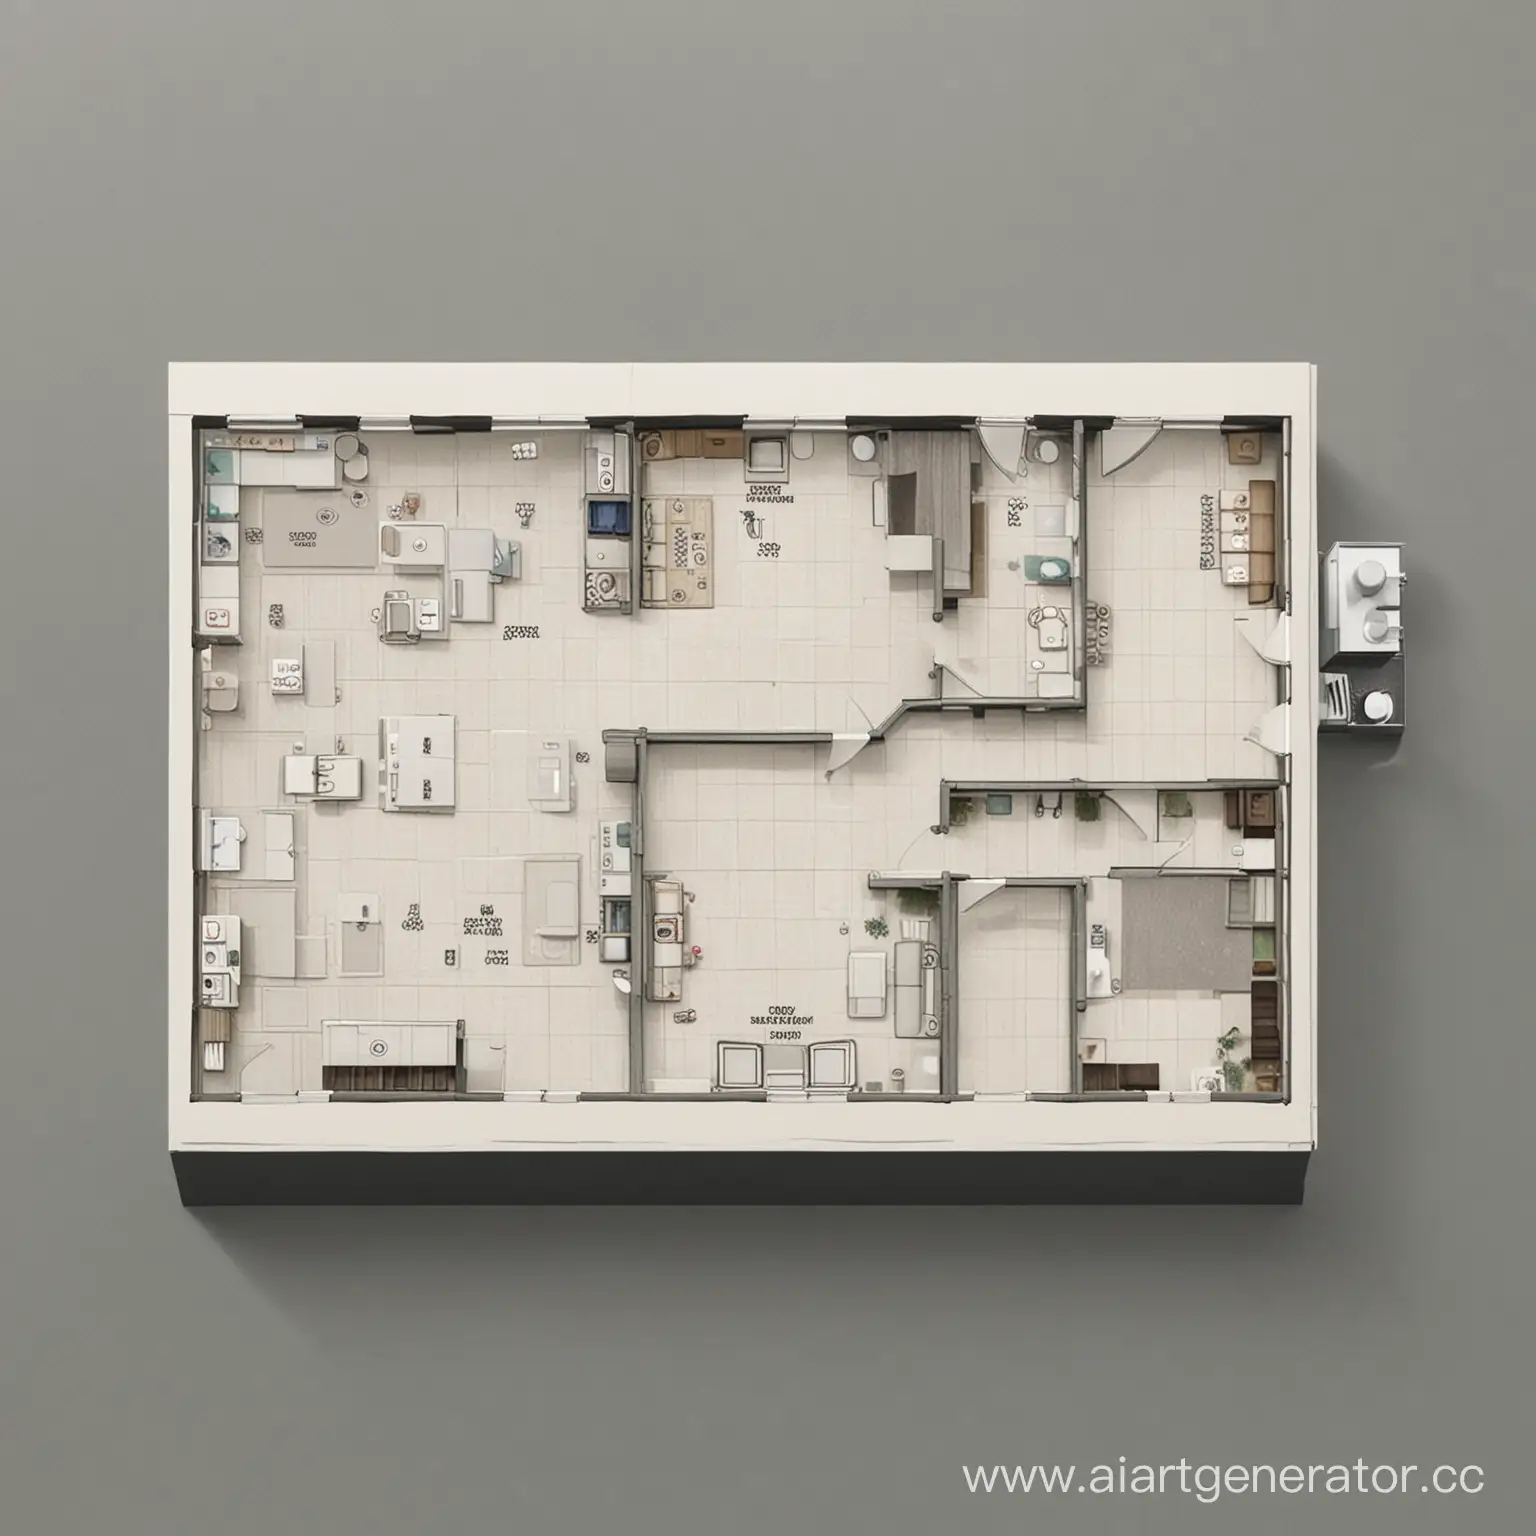 floor plan, 1/100, 500 m square, workshop, wc, cafeteria, green zone, waiting room, store room